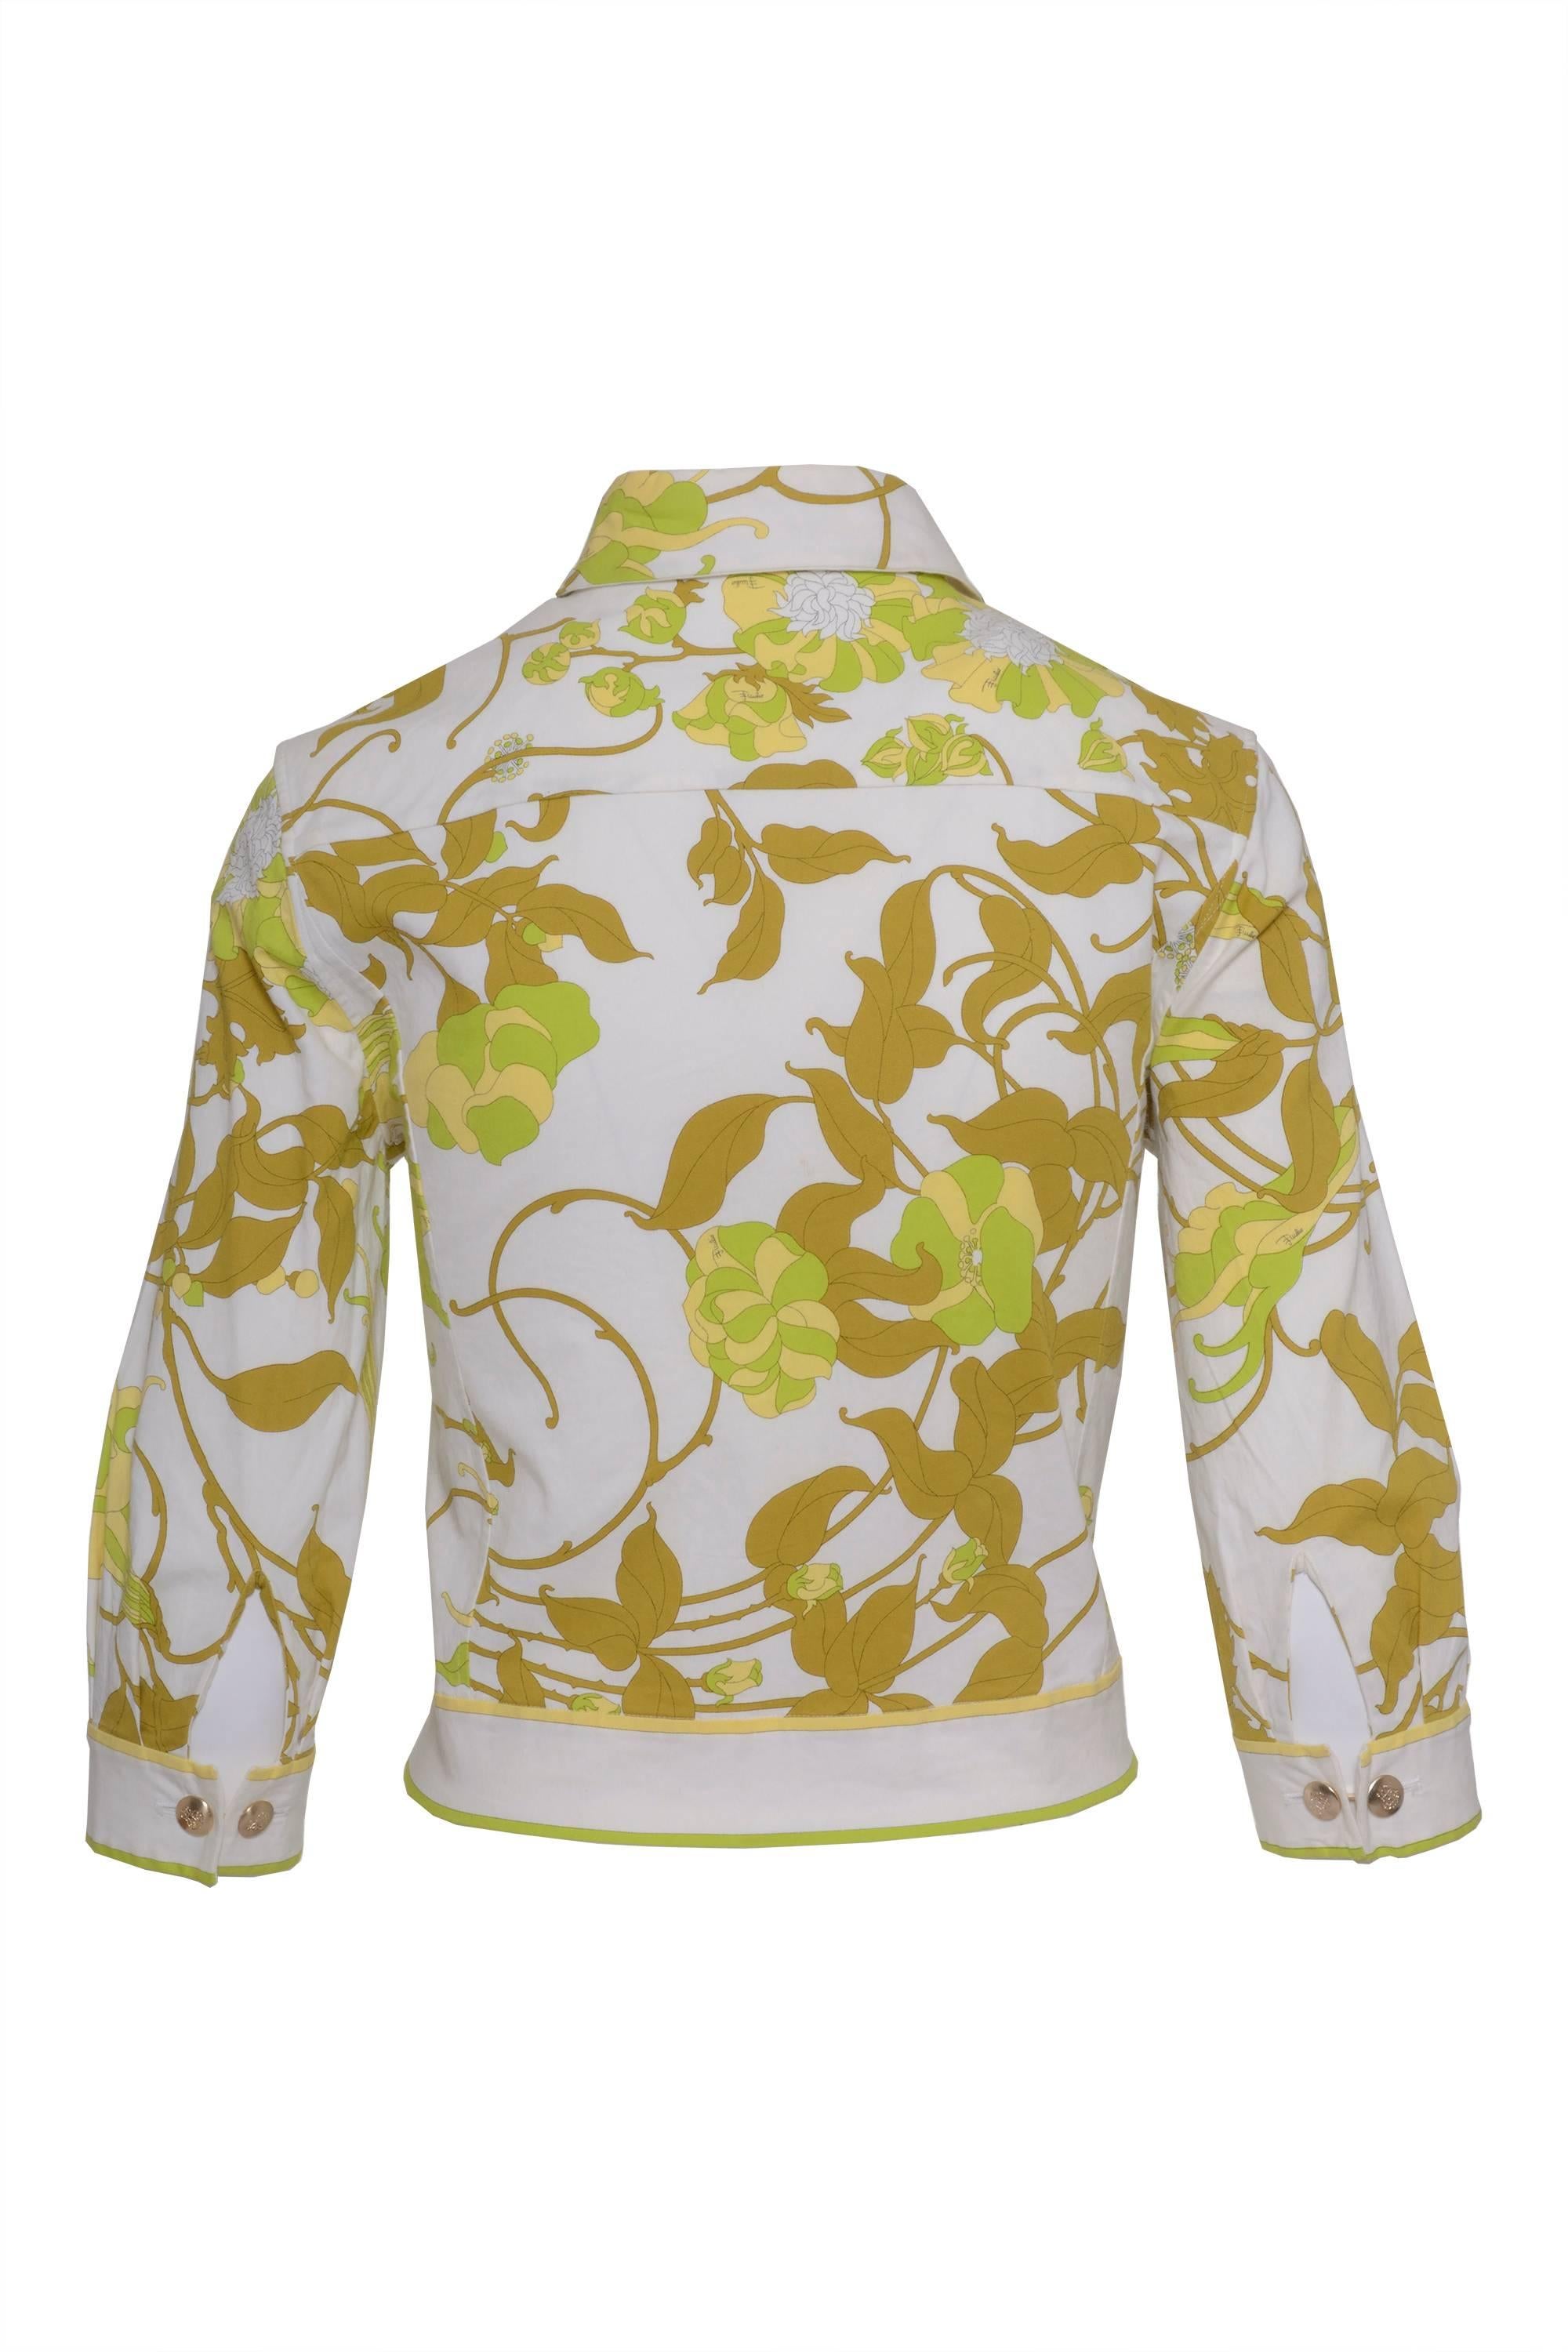 1980s EMILIO PUCCI Floral print jacket with two-seam frontal pockets, regular collar with 2 gold snap, frontal hided zipper, Armhole Princess seam and Horizontal back yoke, the sleeves has loop closure in the cuff, with 1 cufflink. Made in